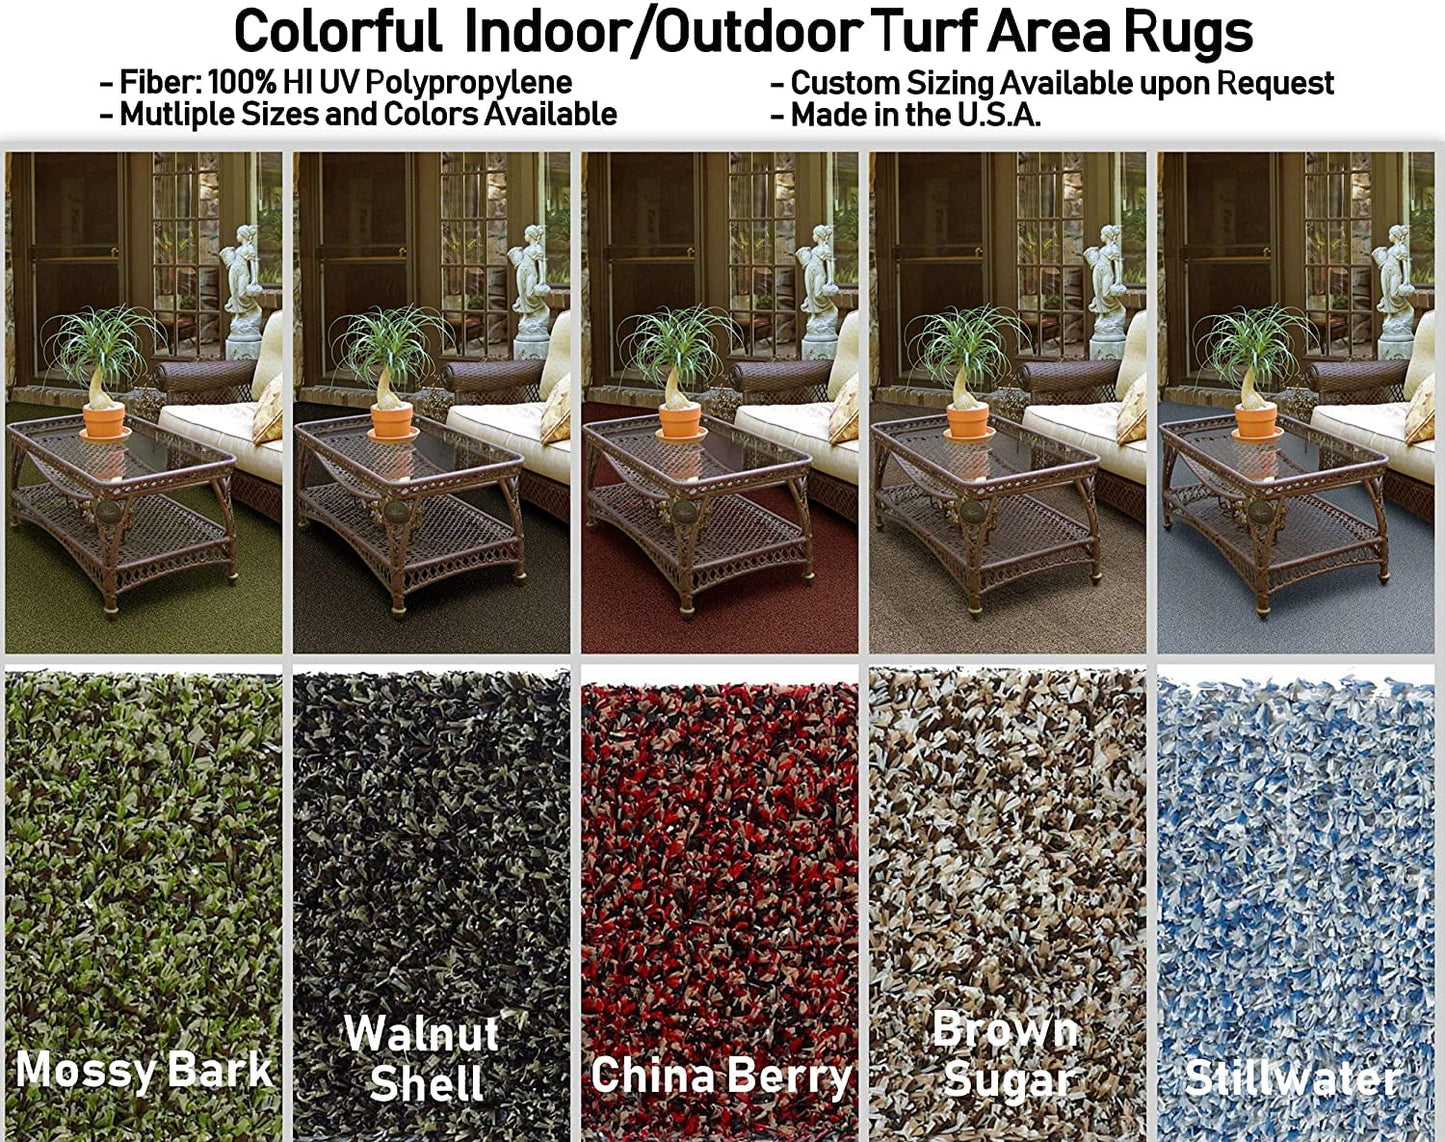 10' x 10' Multi-Colored Indoor/Outdoor Turf Area Rugs. Perfect for Gazebos, Decks, Patios, Balconies and Much More. Many Sizes (Color: Pavement)